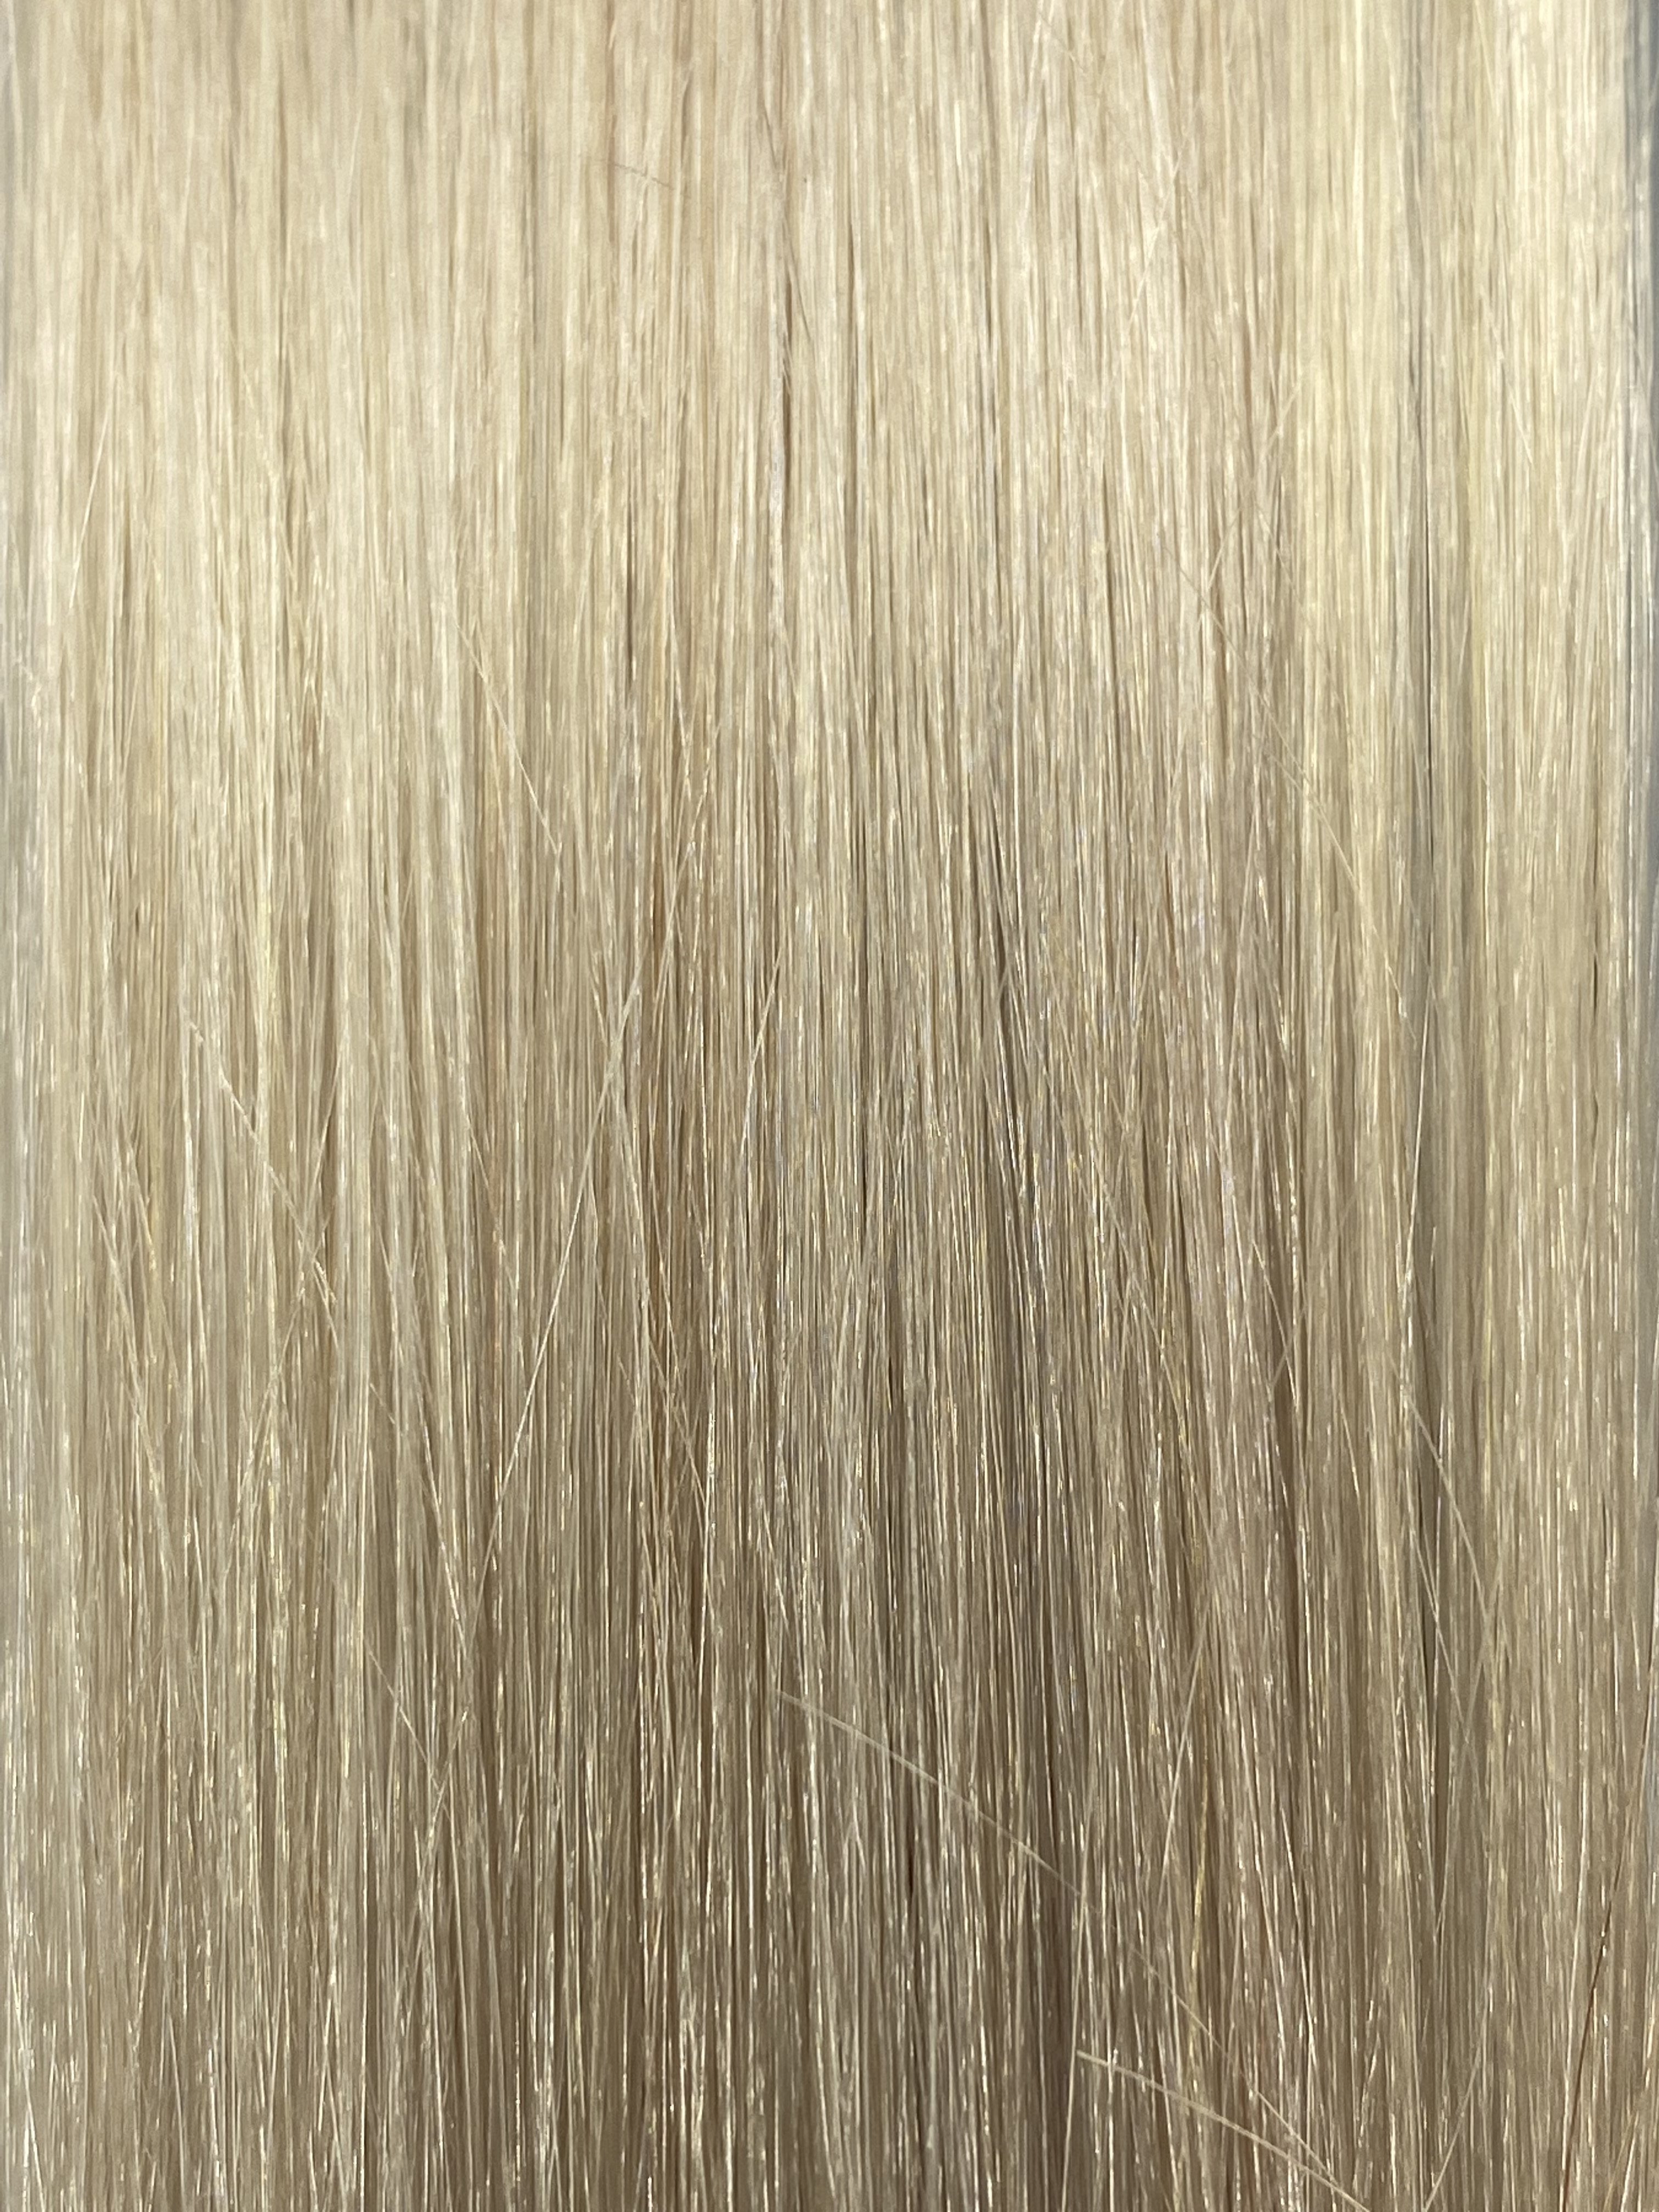 FUSION #1004 ULTRA VERY LIGHT PLATINUM BLONDE 50CM/ 20 INCHES  -  20 GRAMS - Image 1